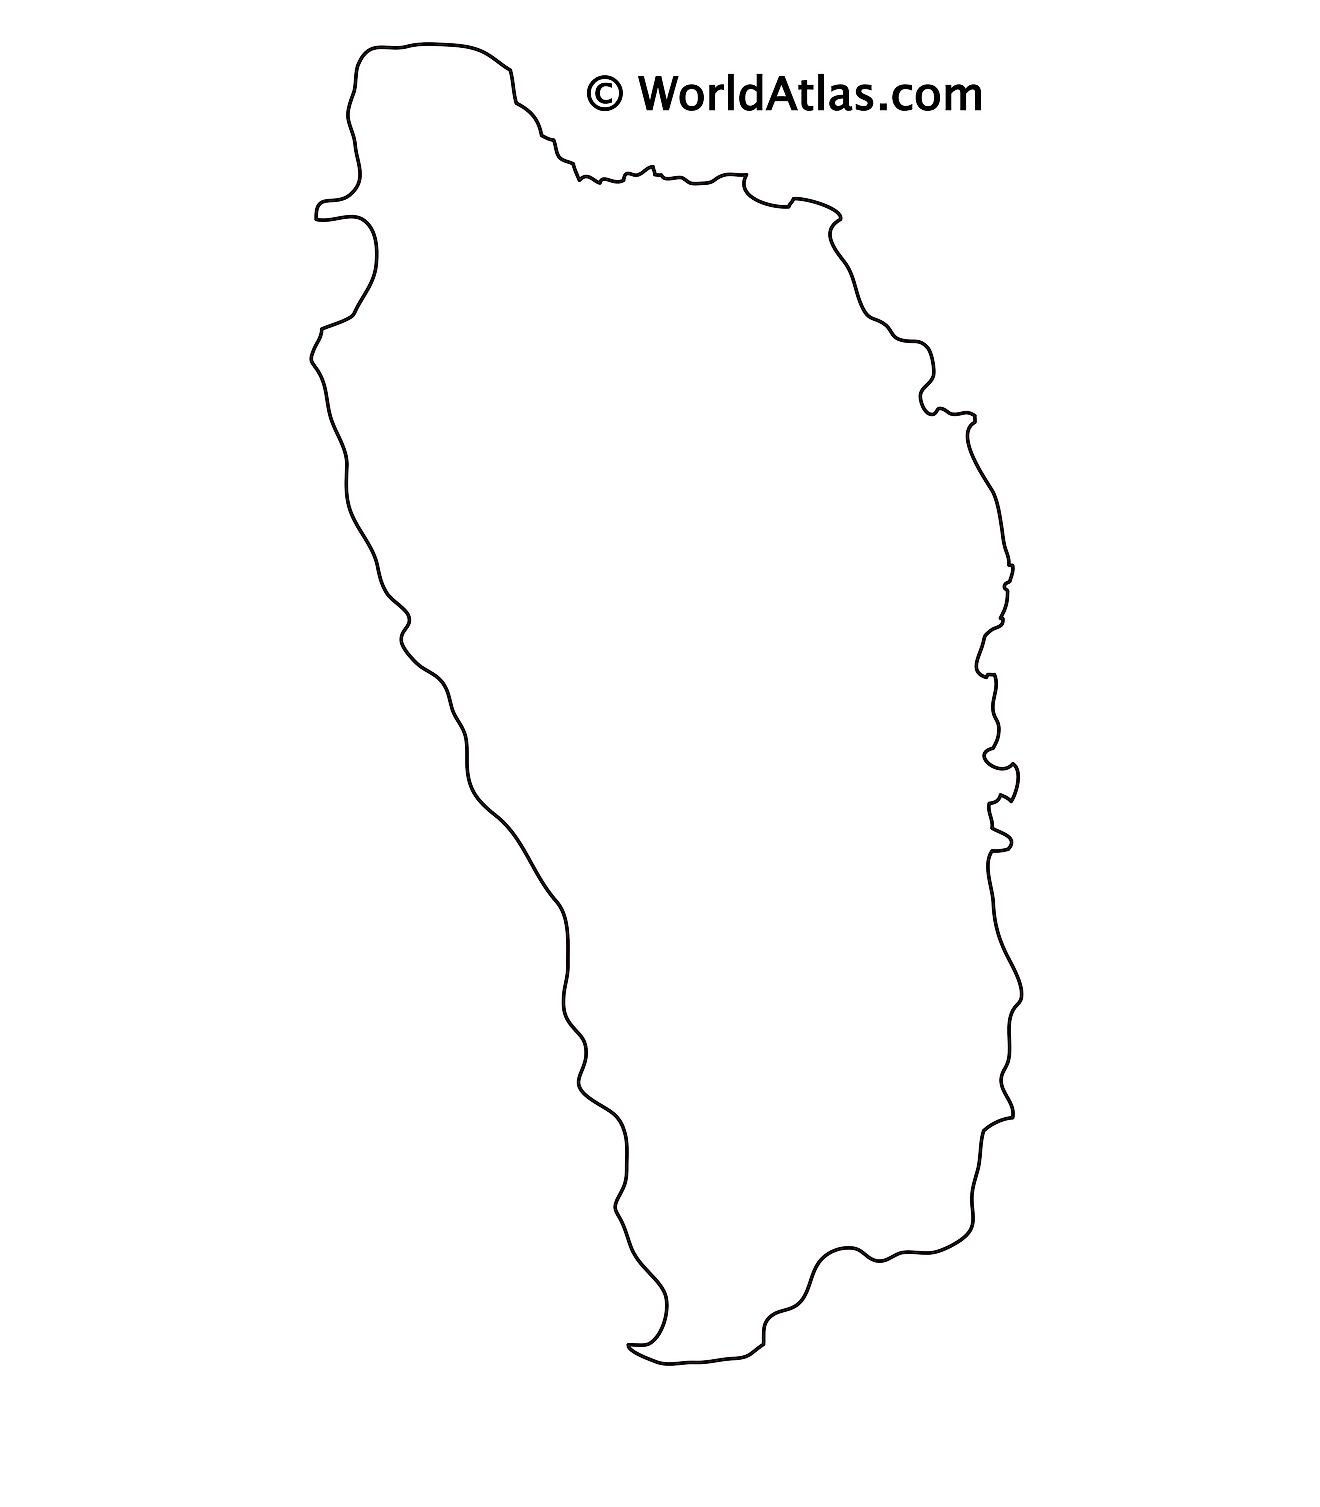 Blank outline map of Dominica